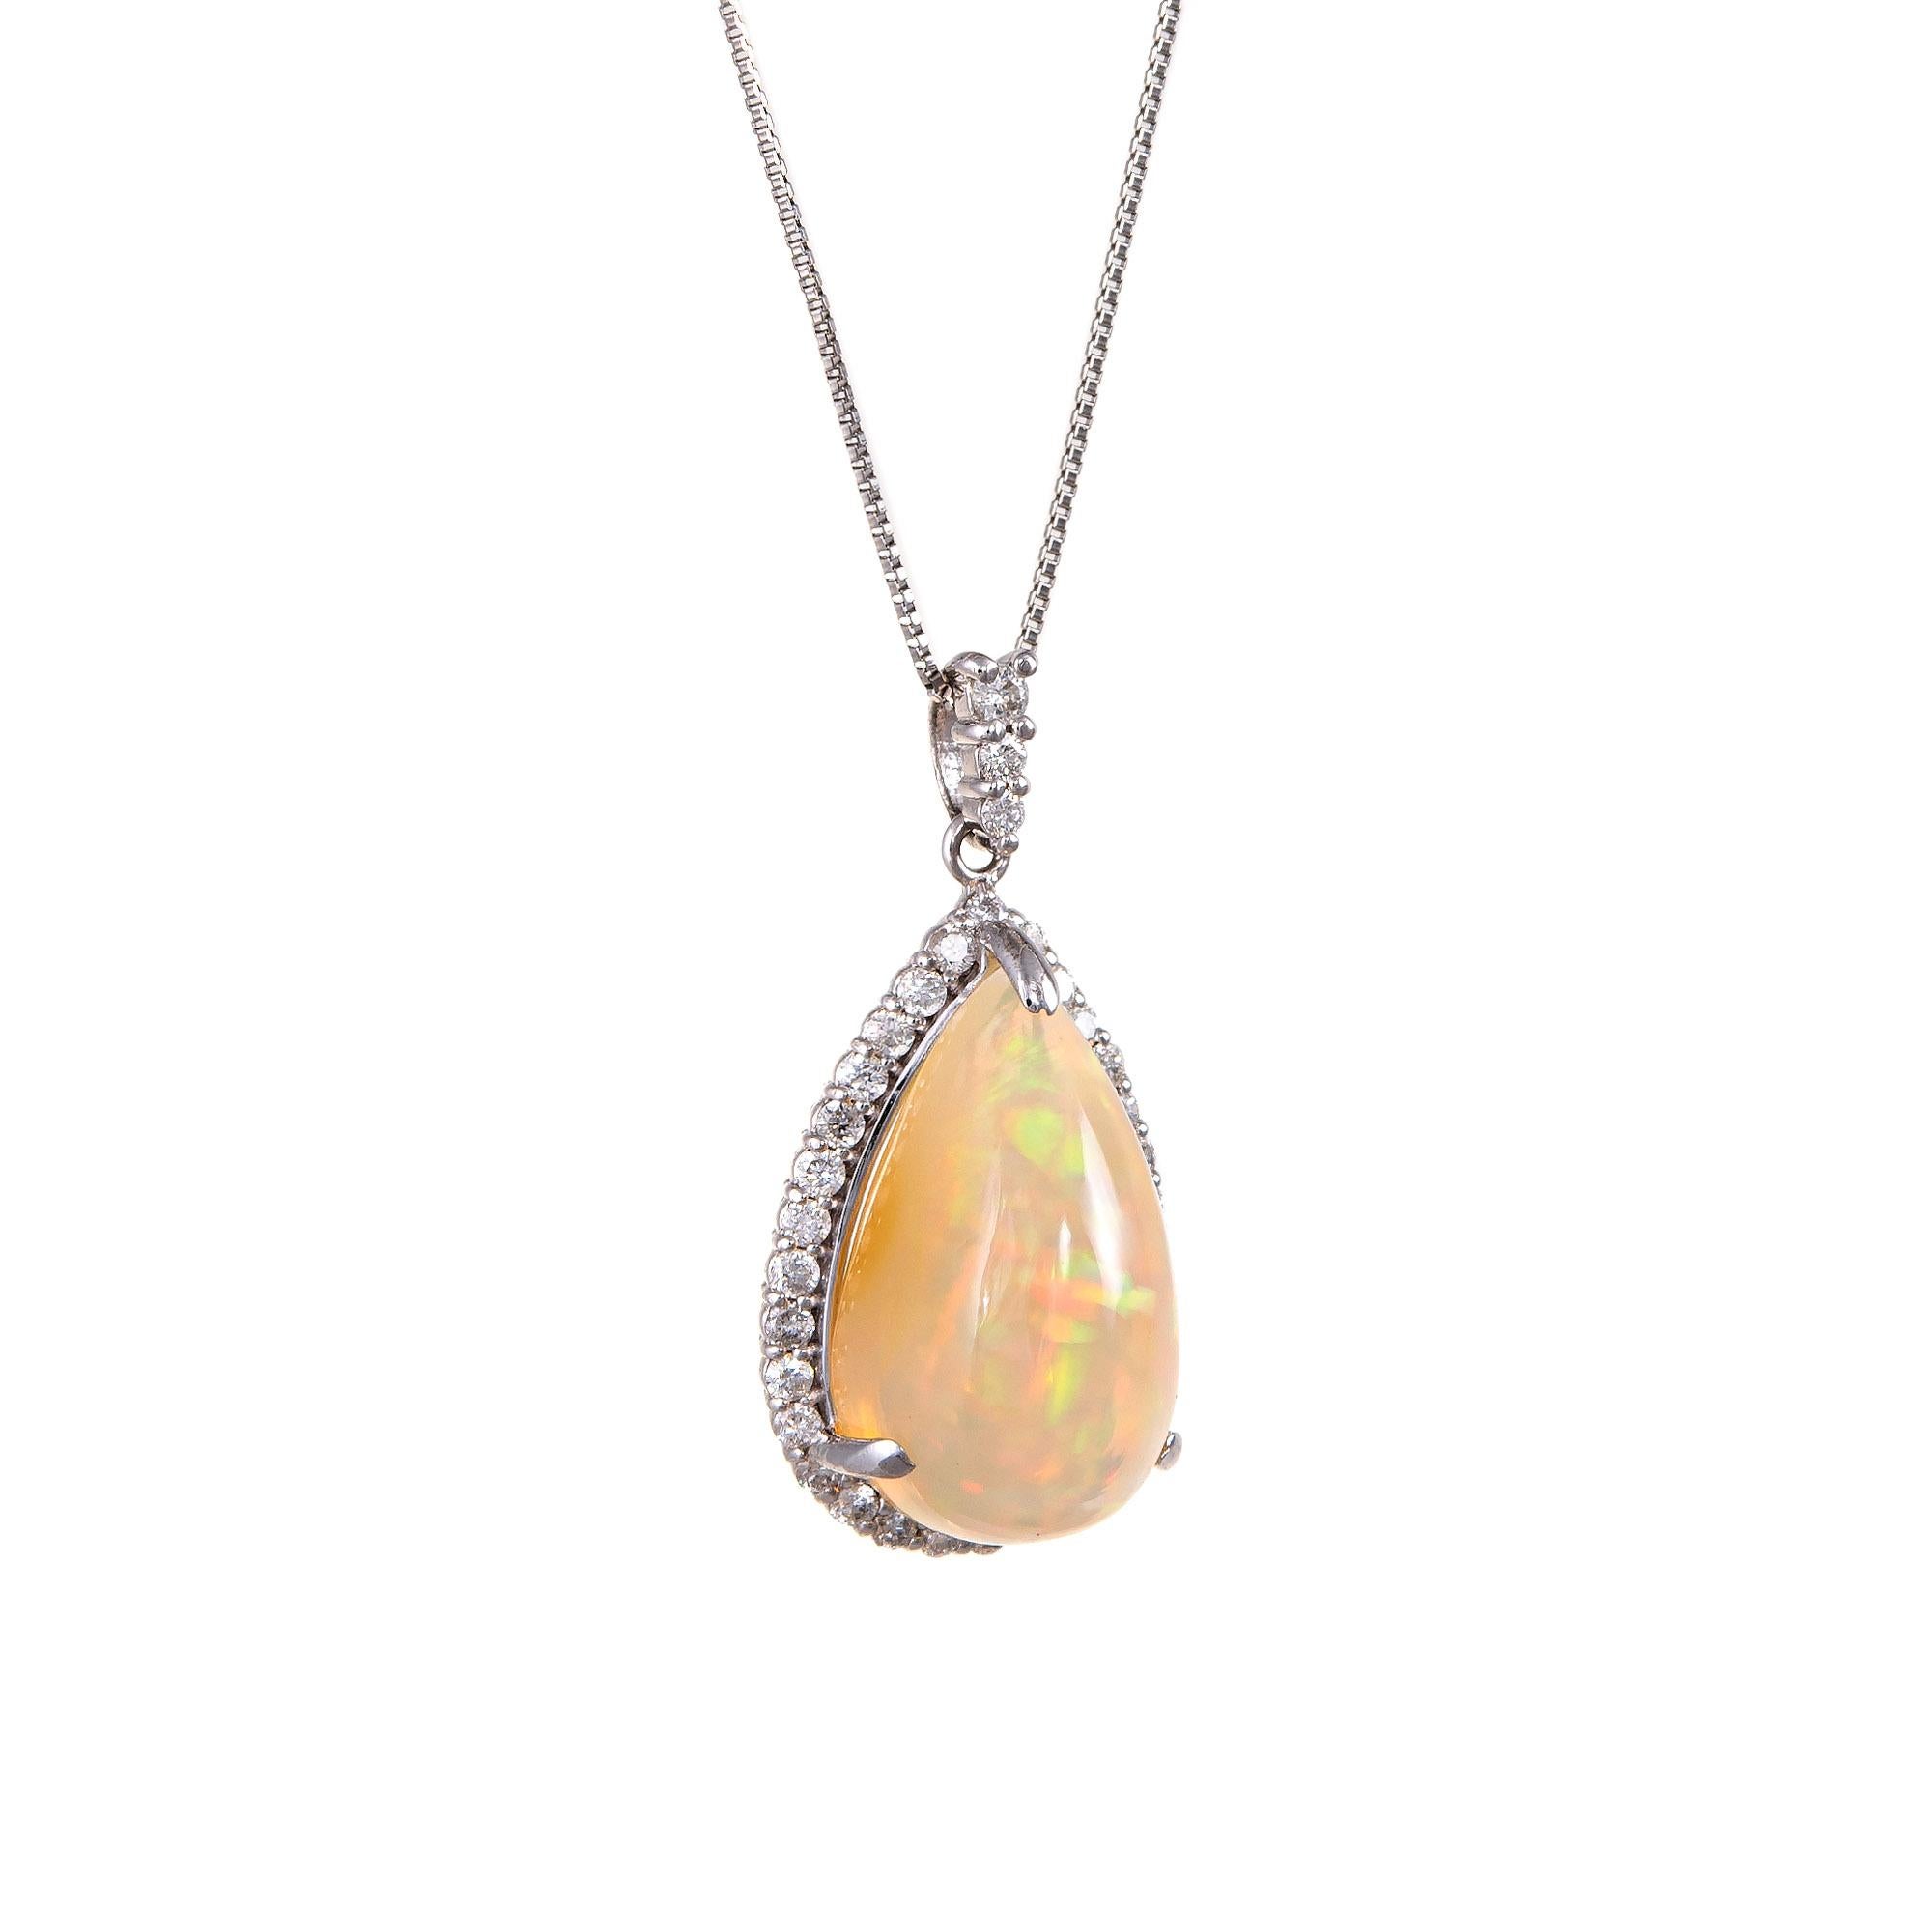 Finely detailed natural Ethiopian fire opal & diamond pendant & necklace crafted in 850 & 900 platinum. 

Natural opal measures 16mm x 9mm (estimated at 4.55 carats), accented with an estimated 0.32 carats of diamonds. The diamonds are estimated at